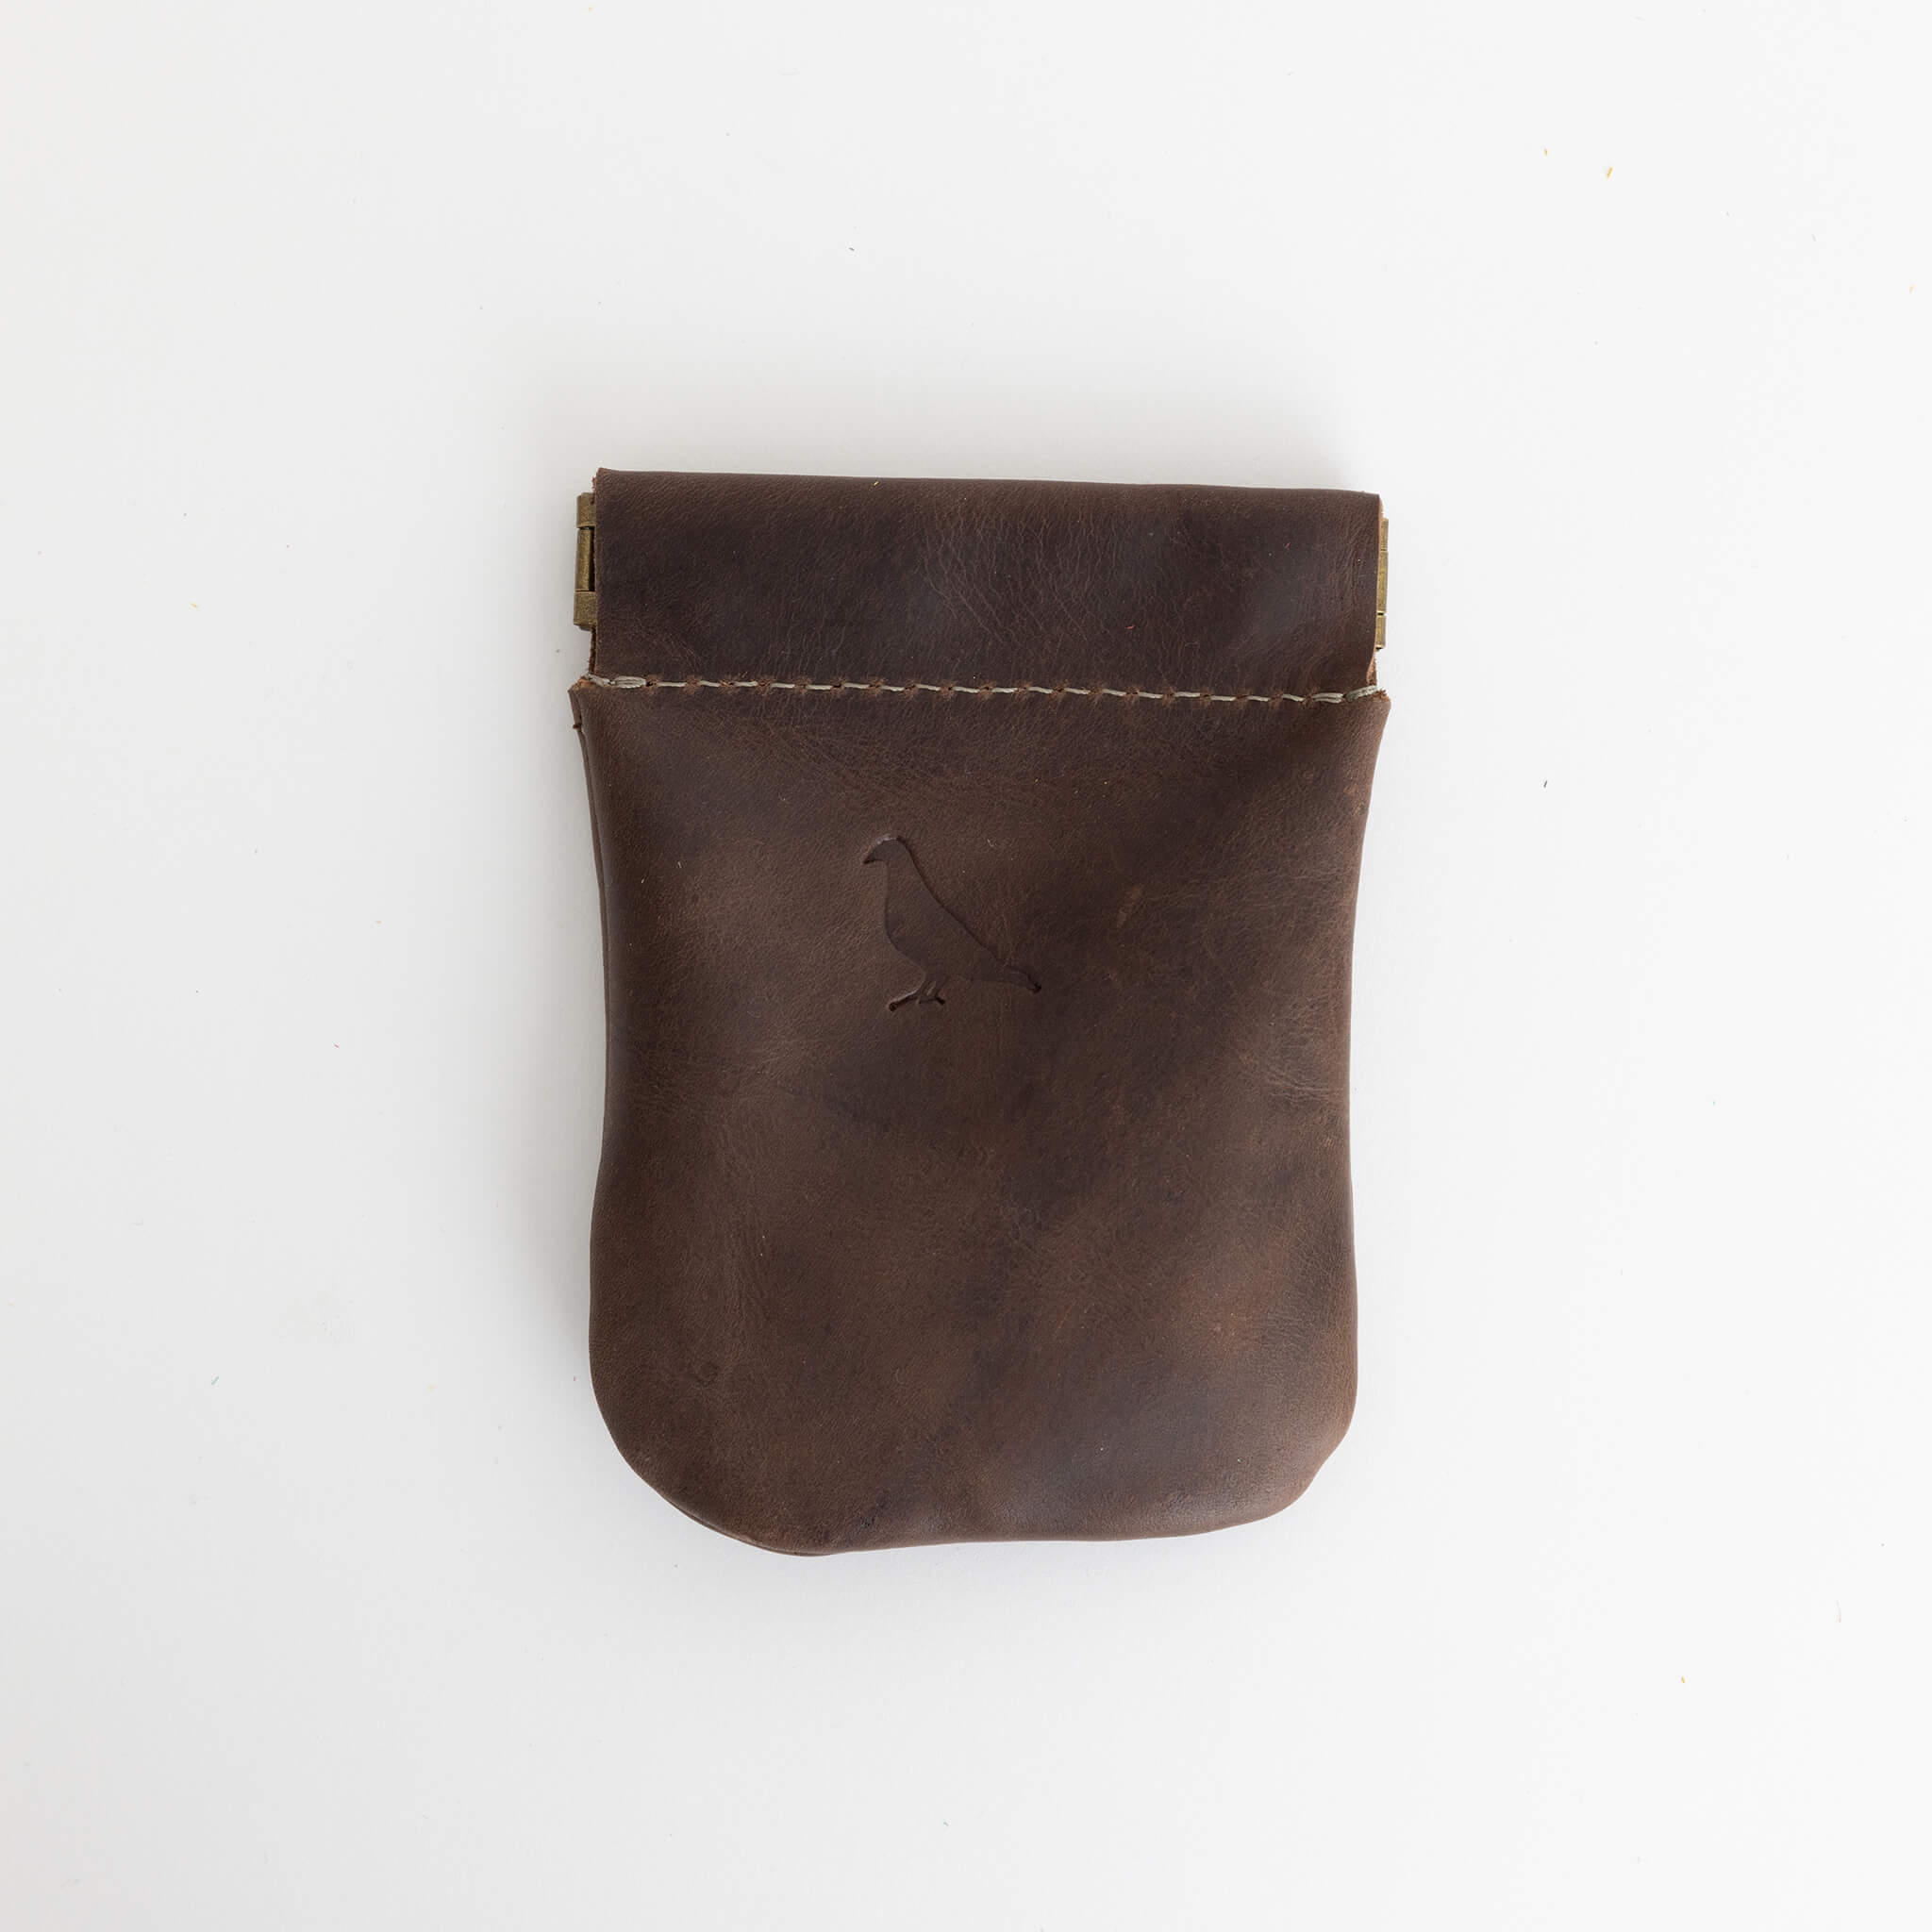 pilu pouch unisex kiss-close pouch - handmade leather - chocolate front view